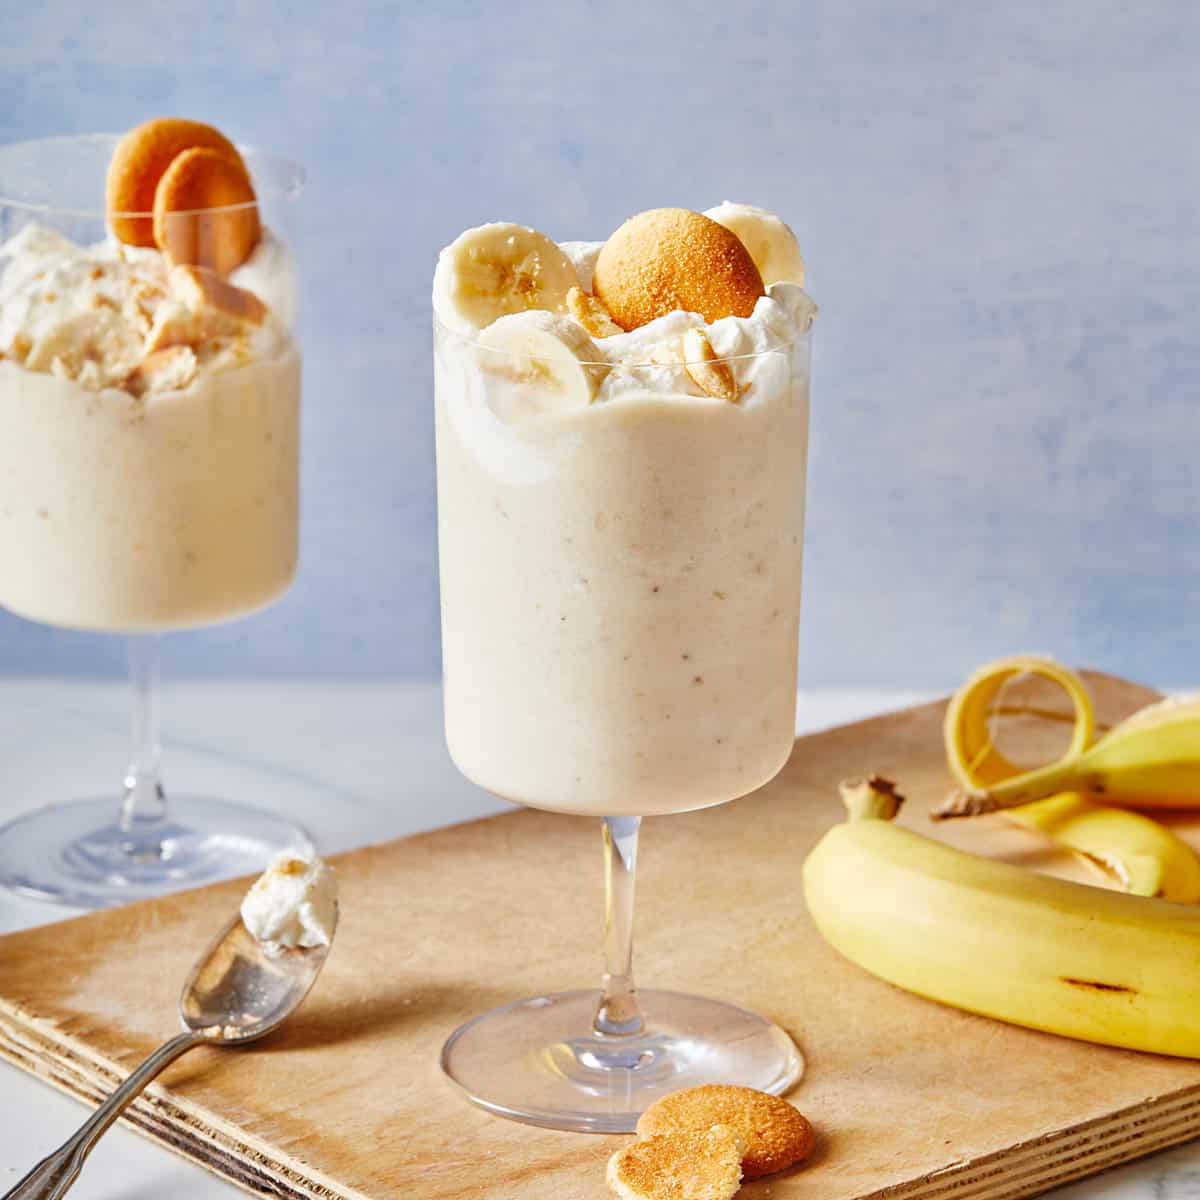 Two homemade banana milkshakes in glasses with whipped cream, bananas and nilla wafer on top.